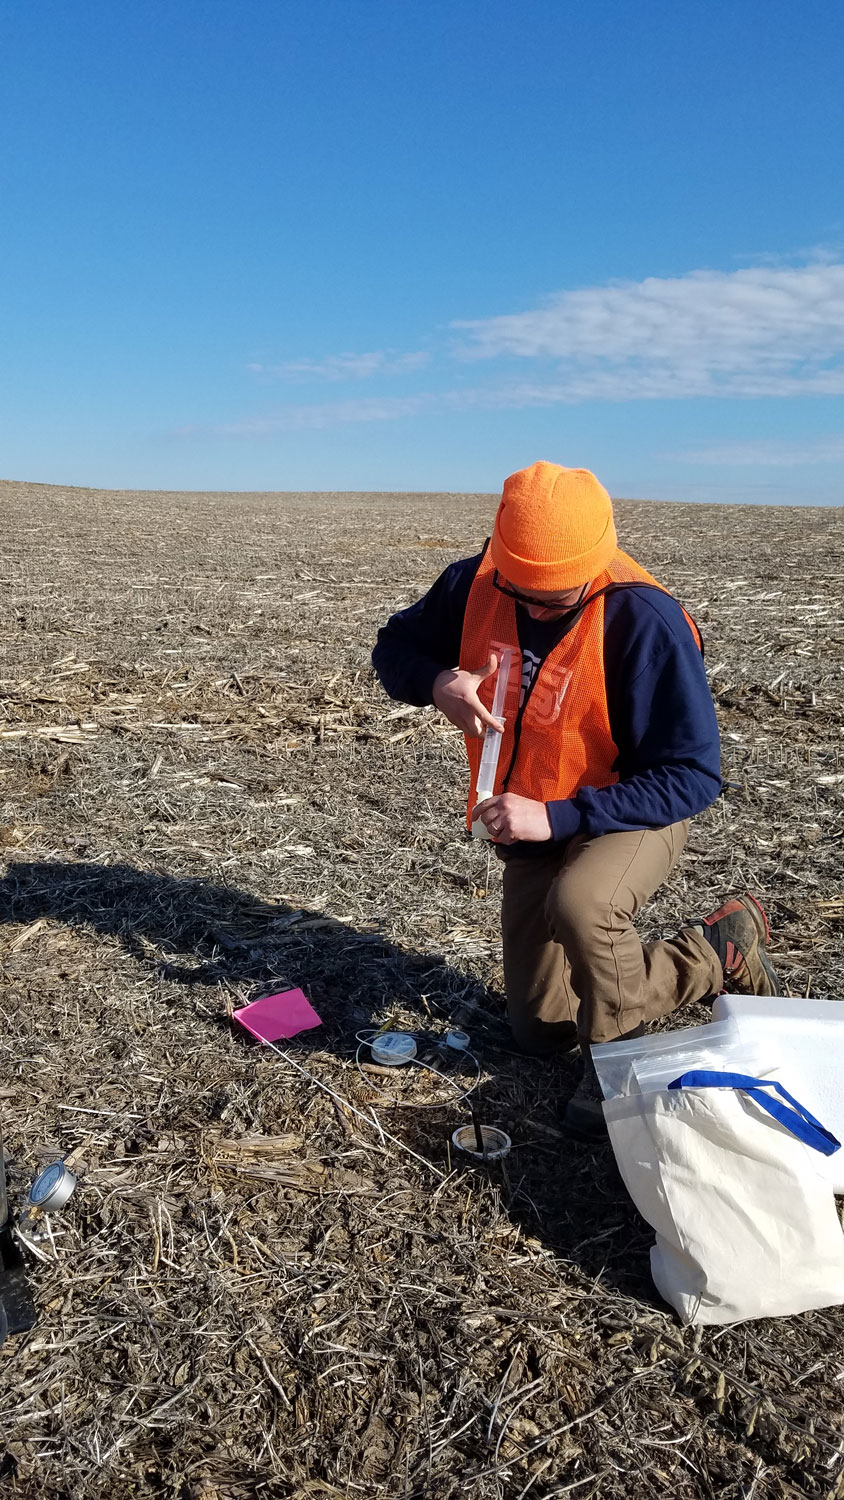 Collecting samples on the field site.